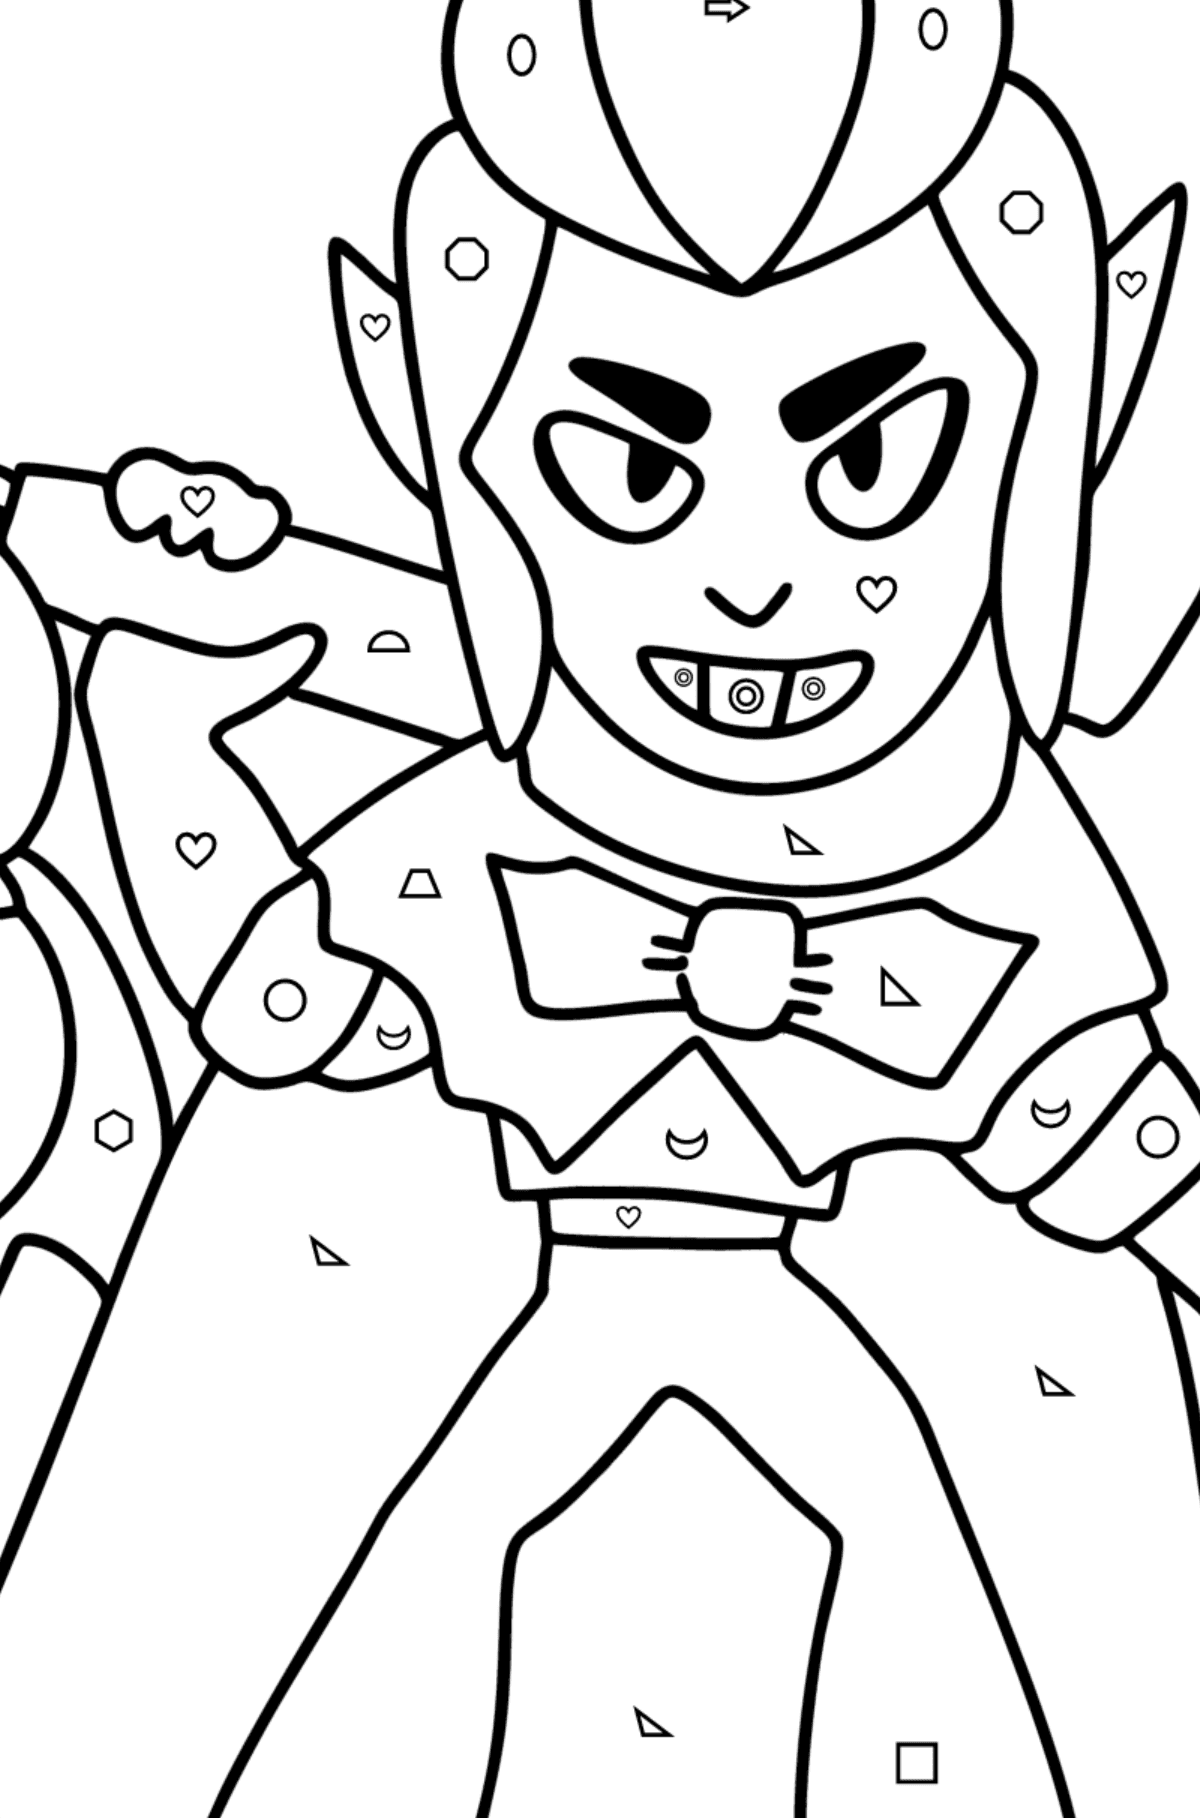 Brawl Stars Mortis coloring page - Coloring by Geometric Shapes for Kids